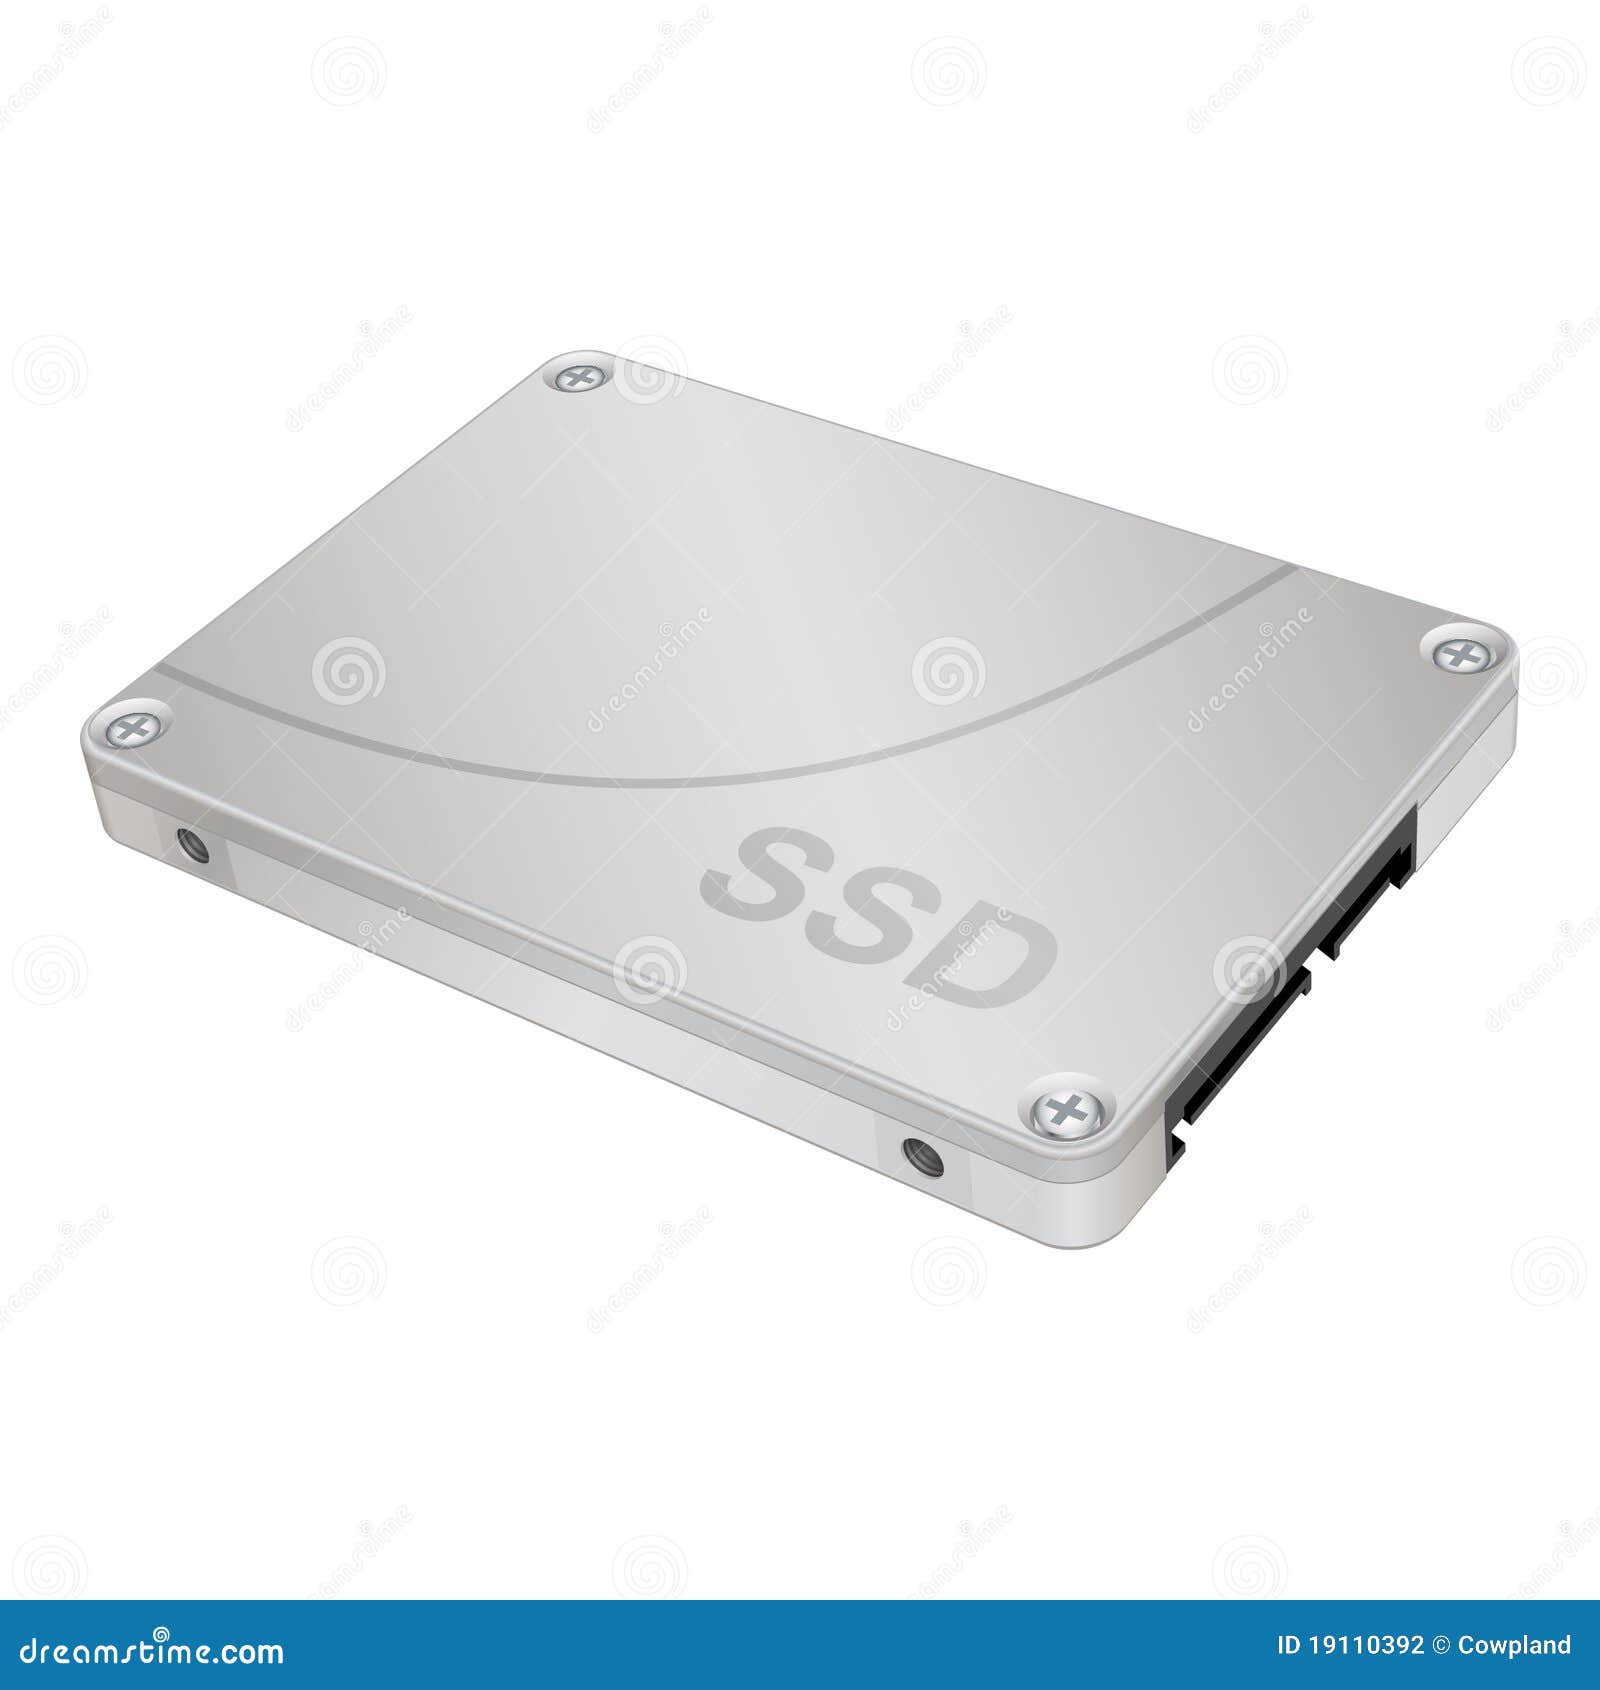 ssd (solid-state drive)